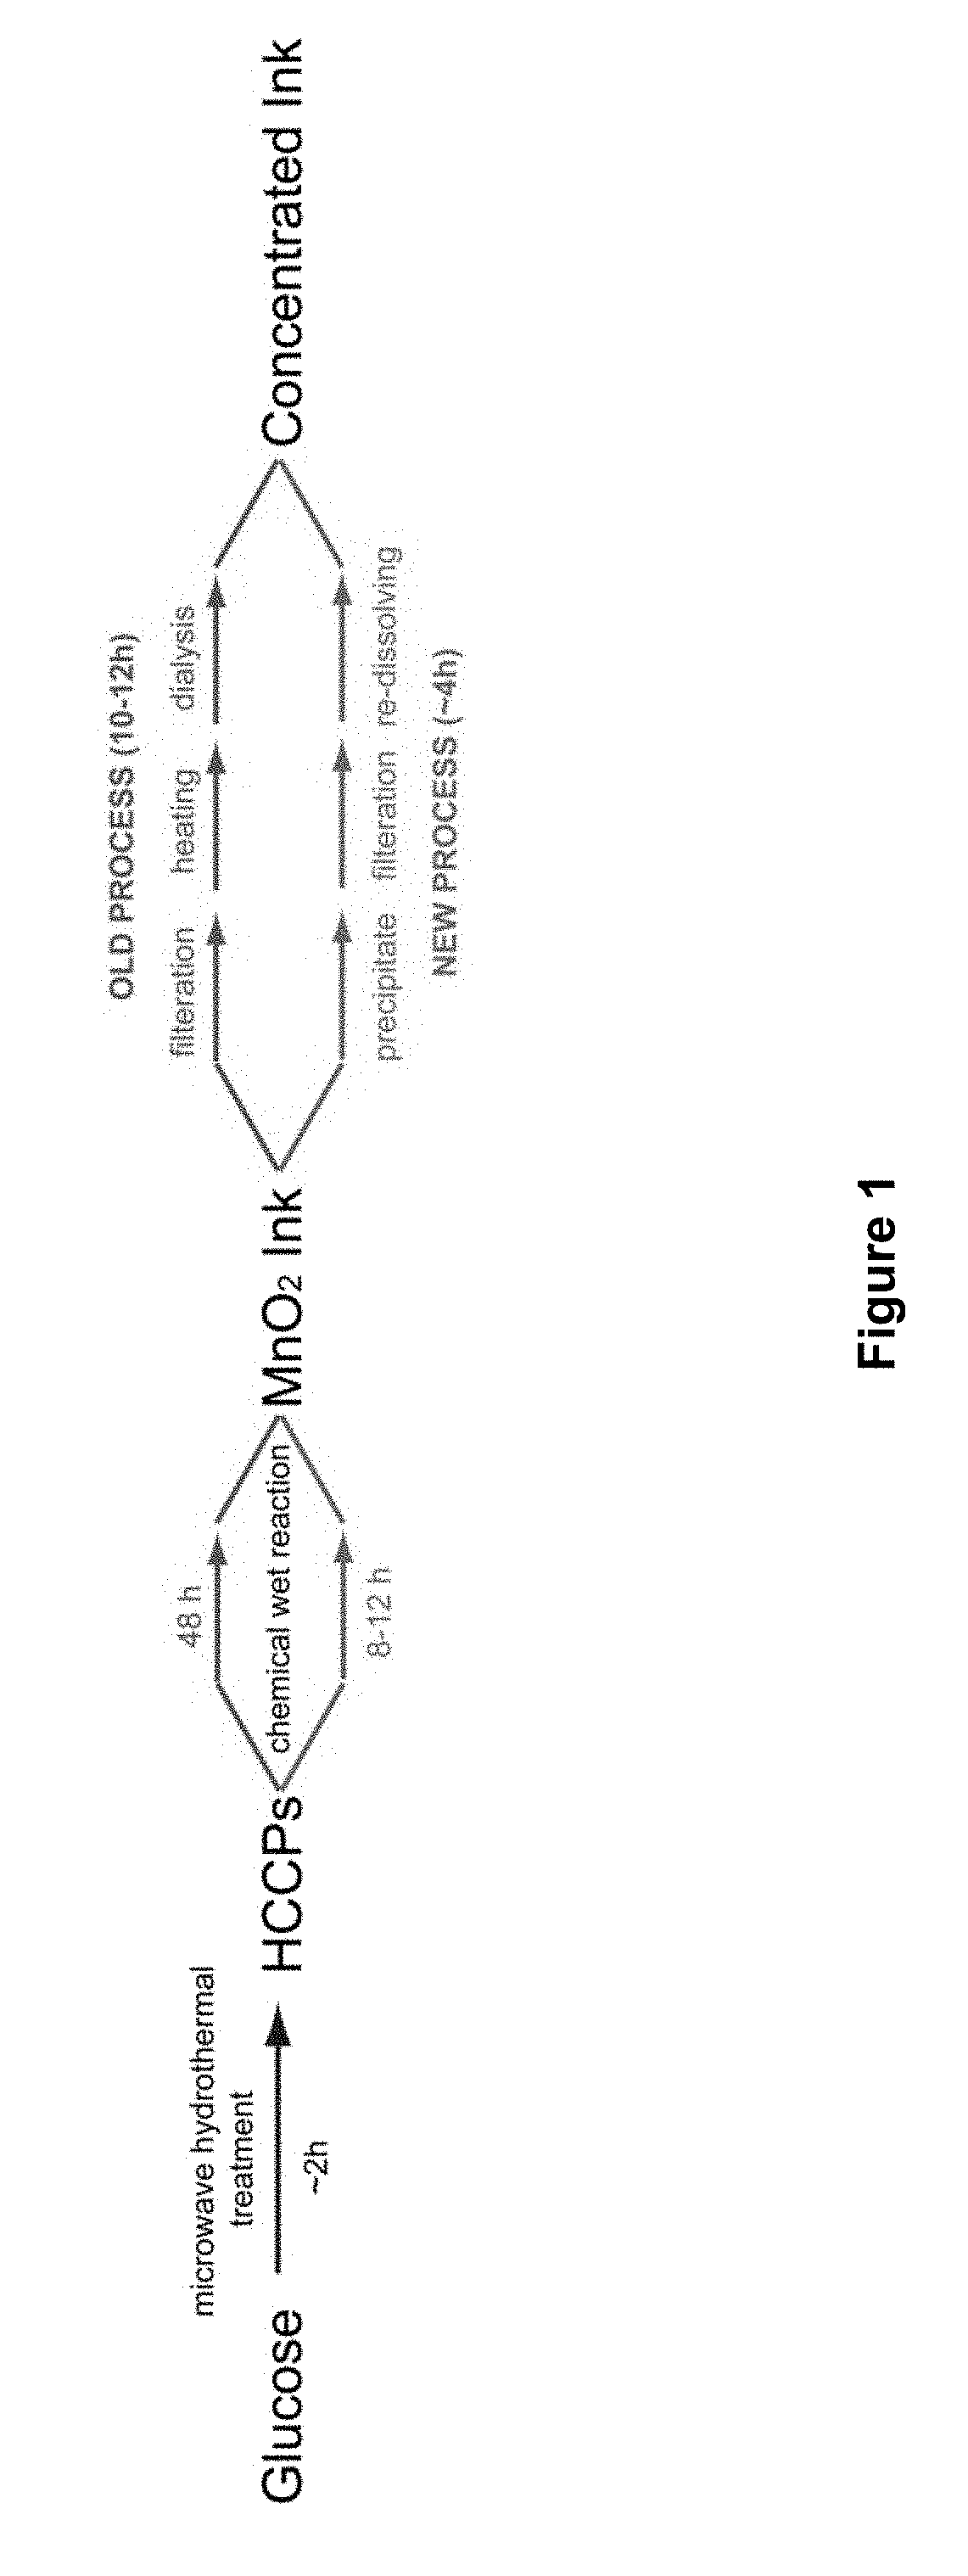 Method for preparing aqueous mno2 ink and capacitive energy storage devices comprising mno2